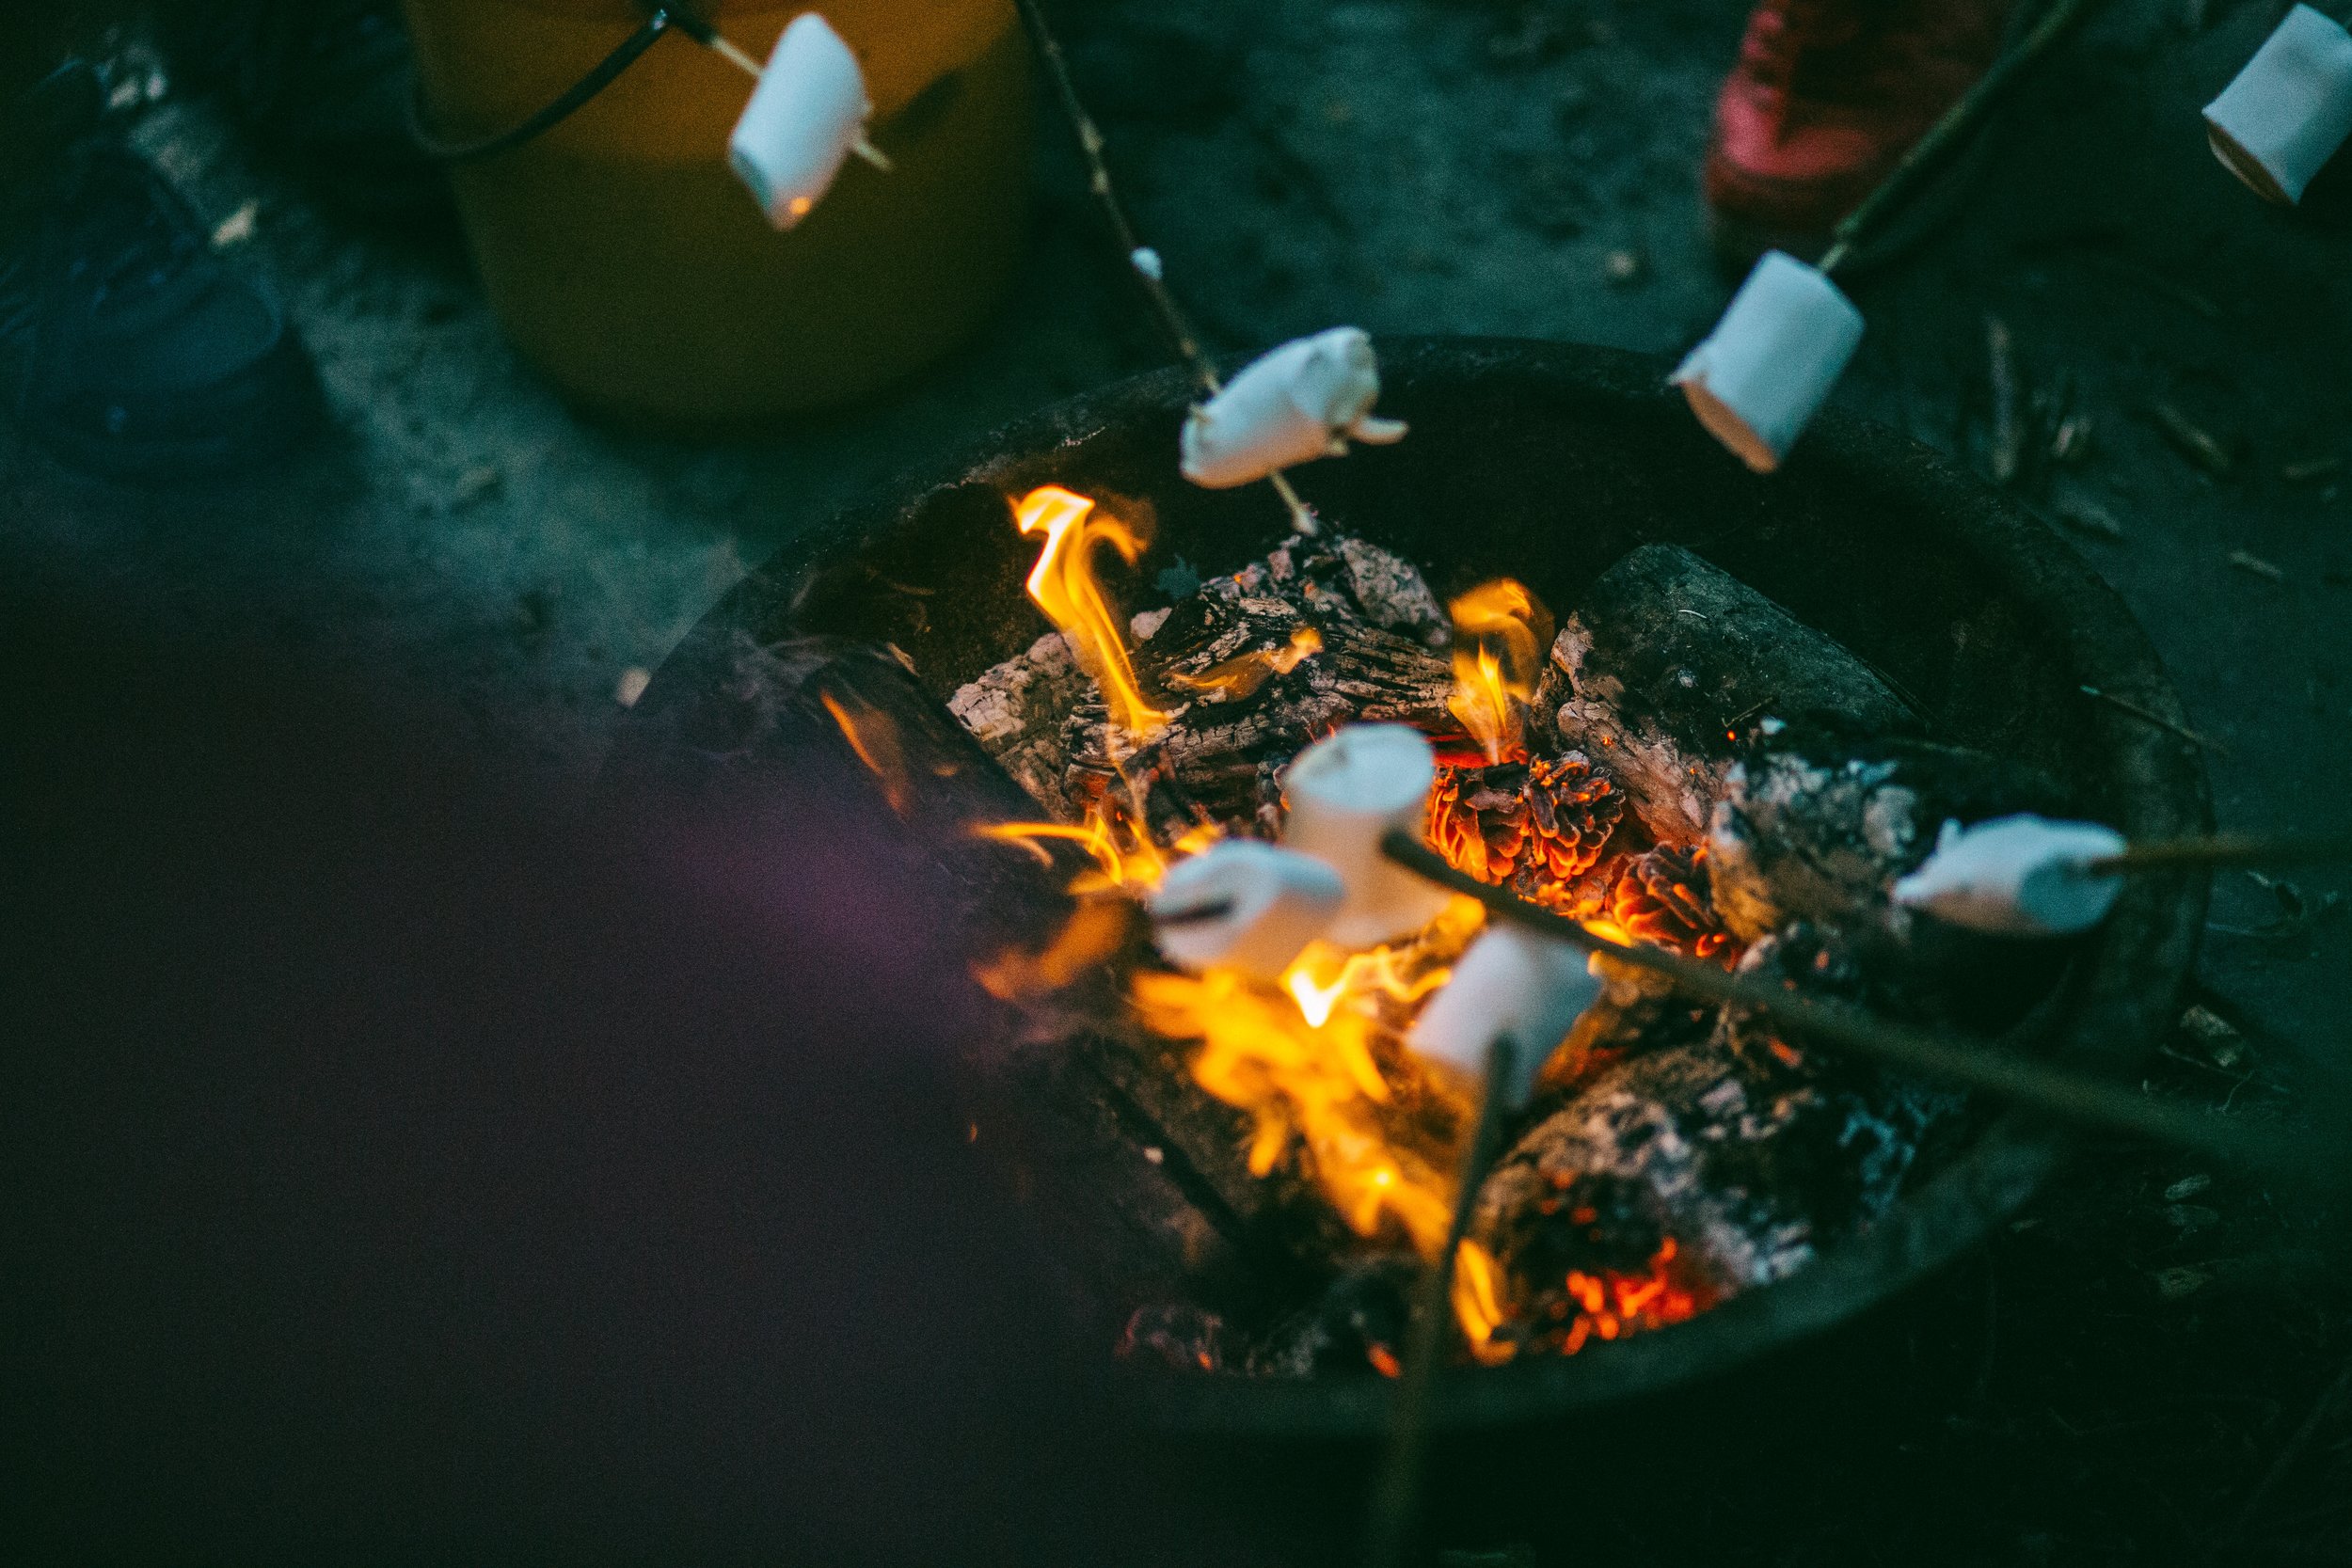 Roasting marshmallows on a campfire